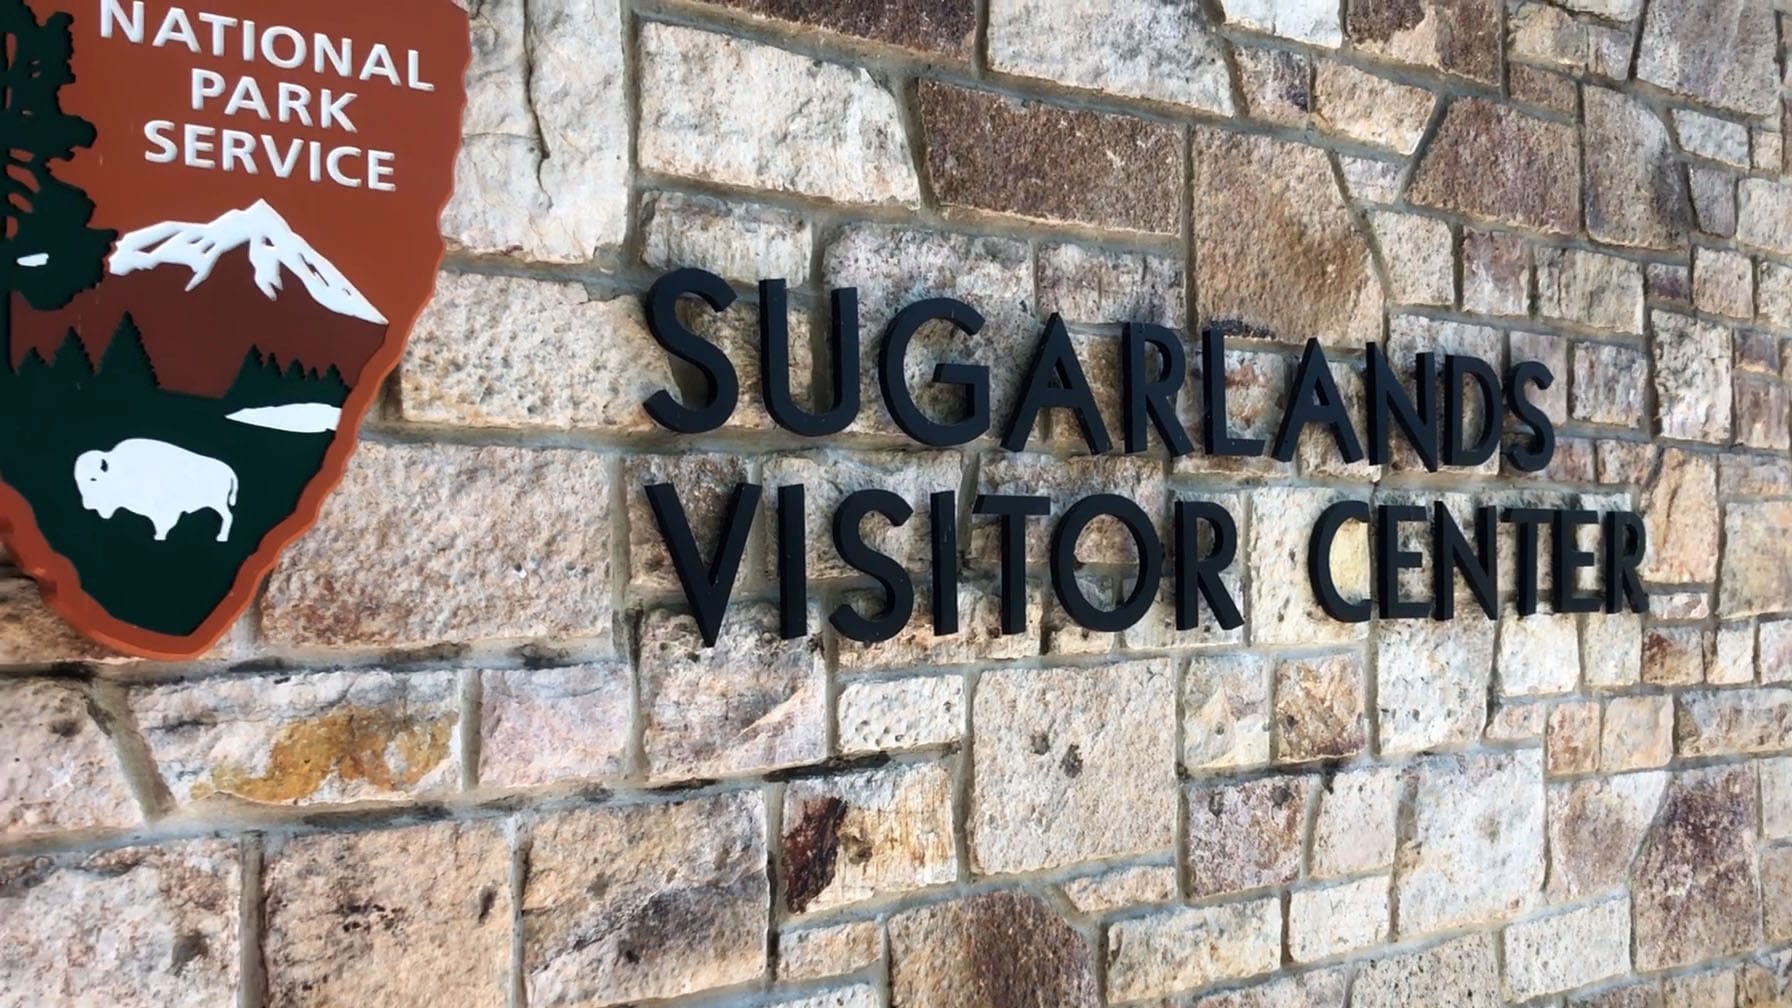 "Sugarlands Visitor Center" sign against a brick wall.